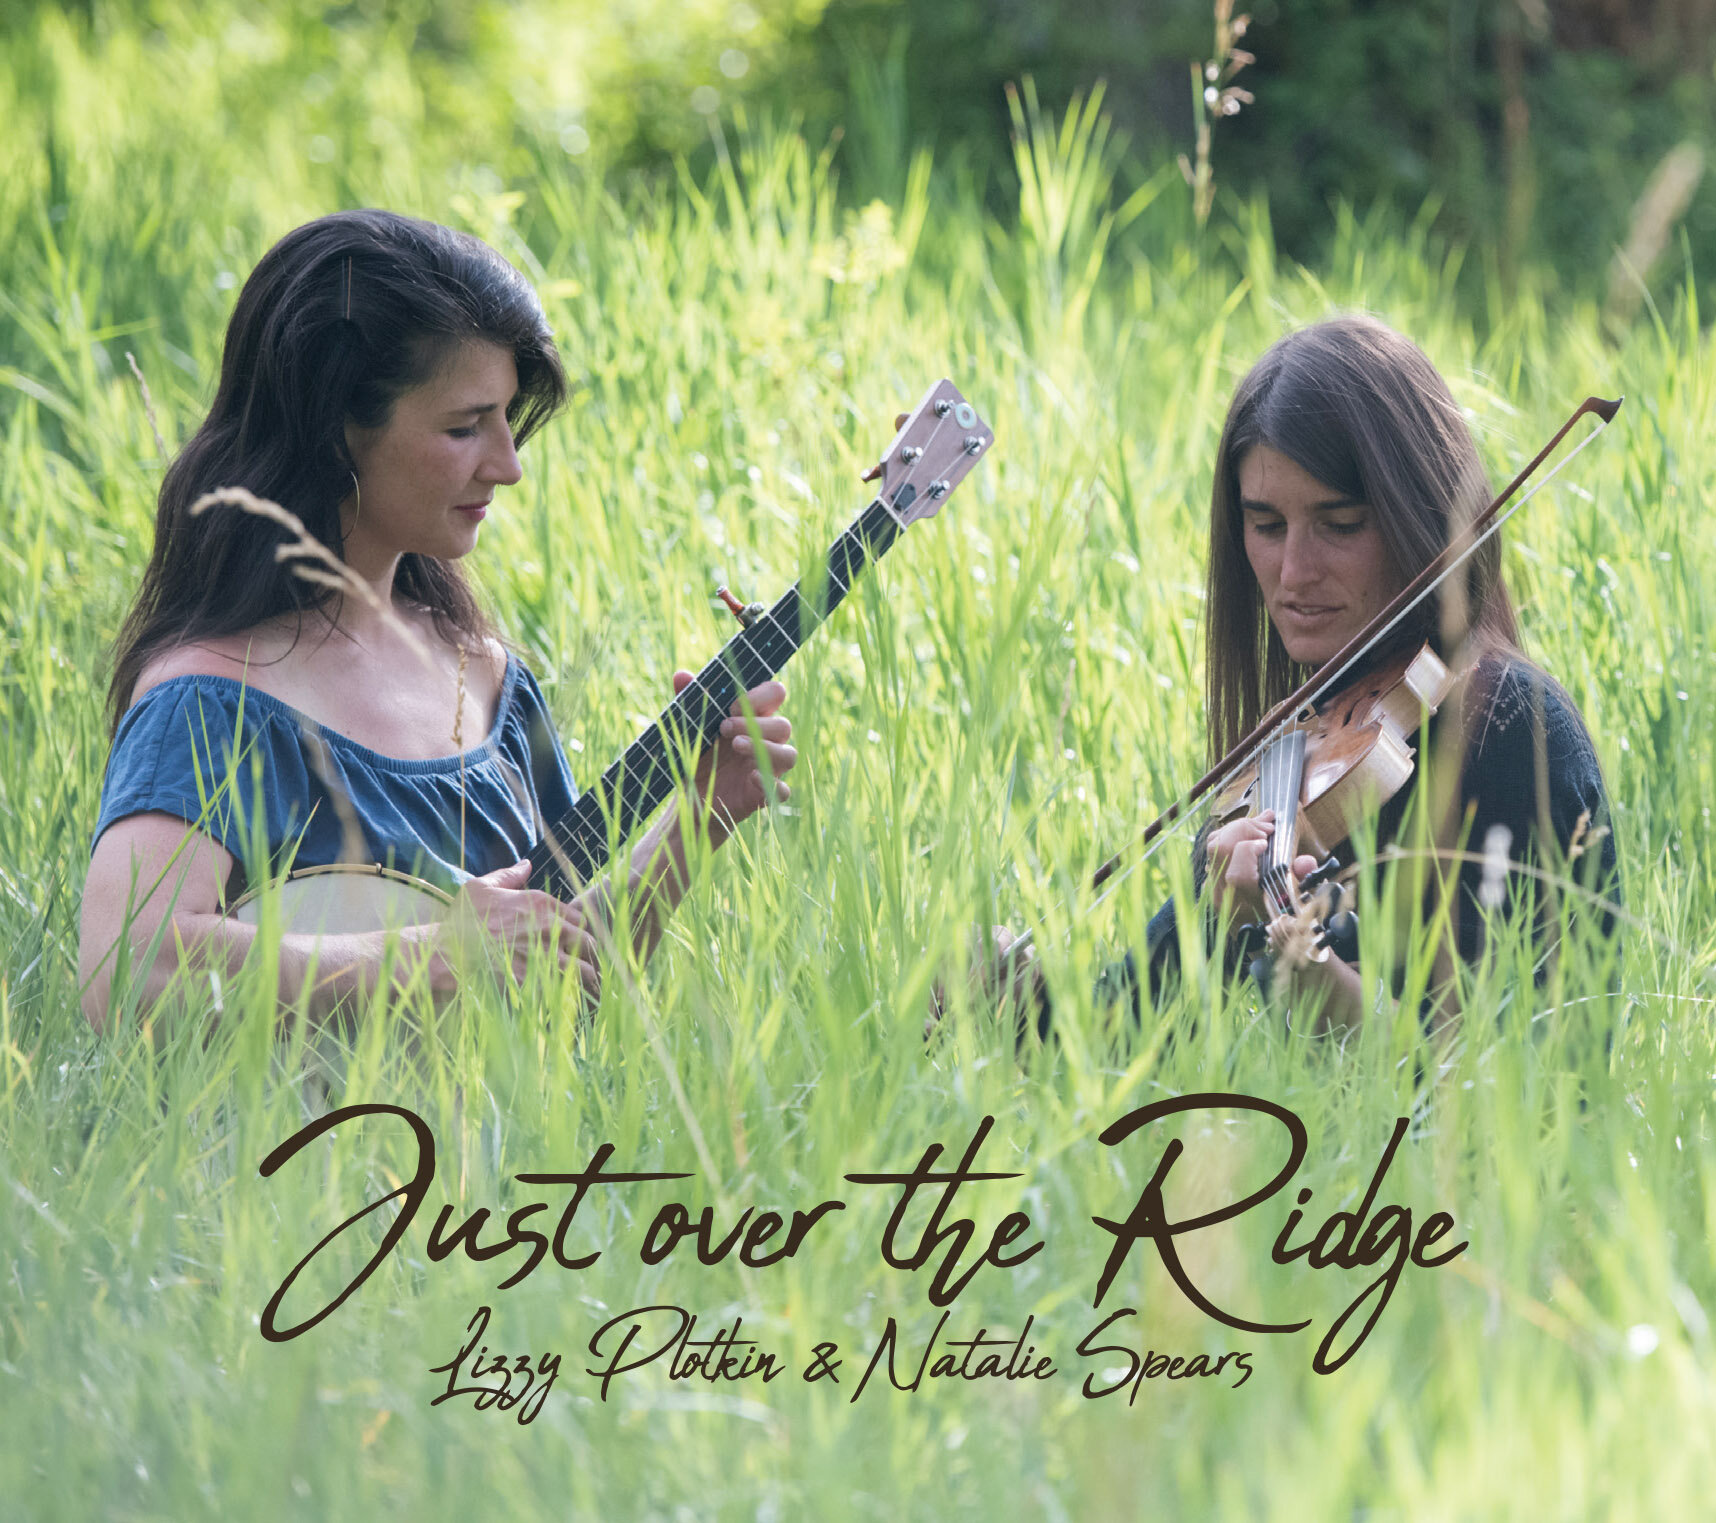 Lizzy Plotkin and Natalie Spears - Just Over the Ridge